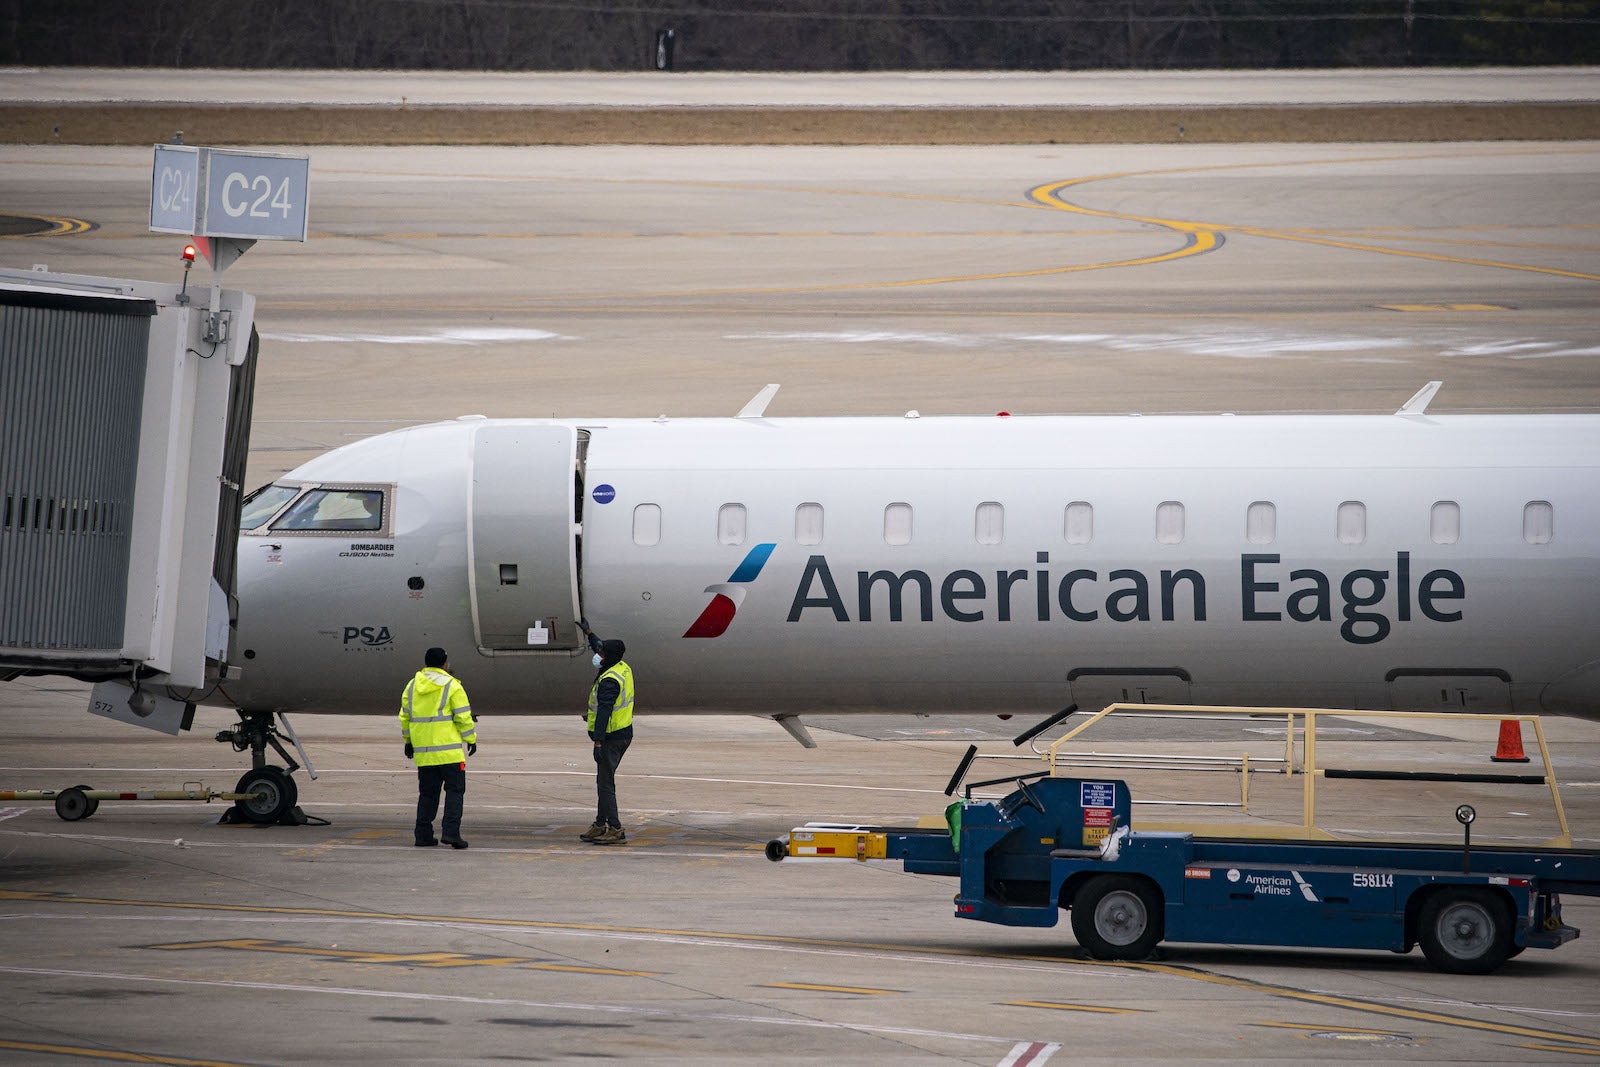 Pilots at third American Airlines regional carrier get huge pay increase GettyImages 1237866223